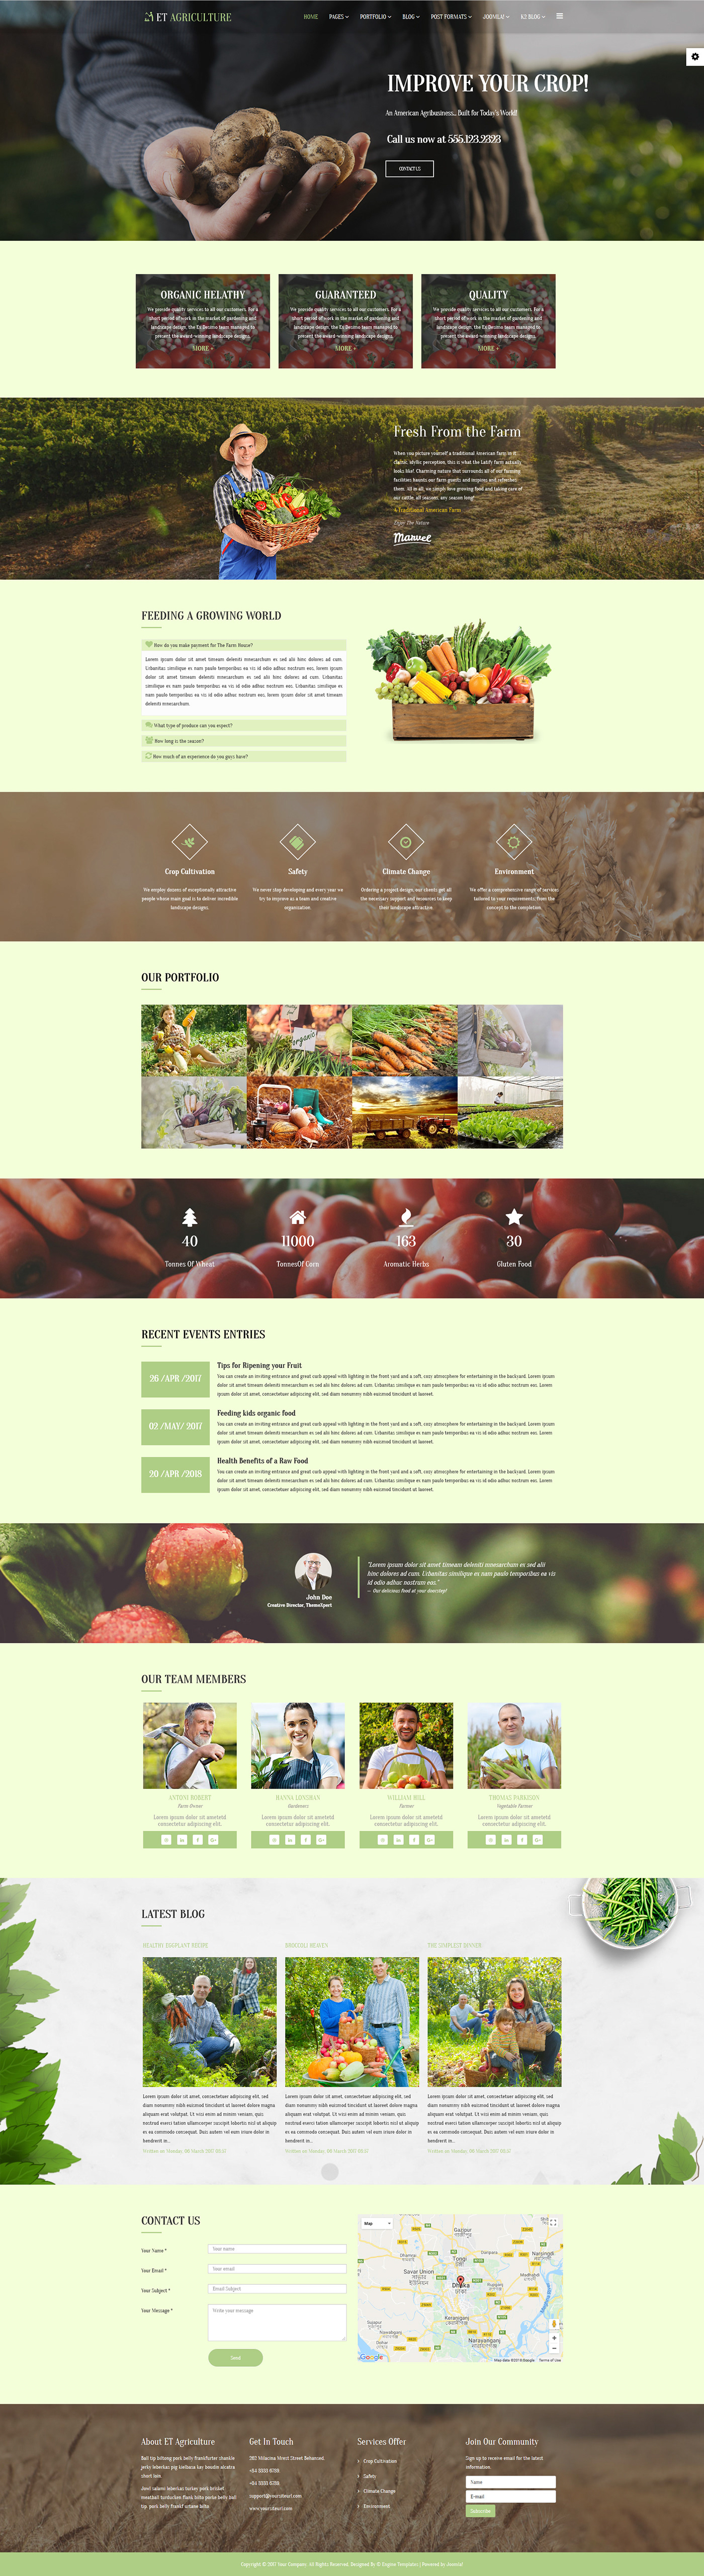 agriculture website templates Agriculture Joomla Template joomla joomla template free joomla template